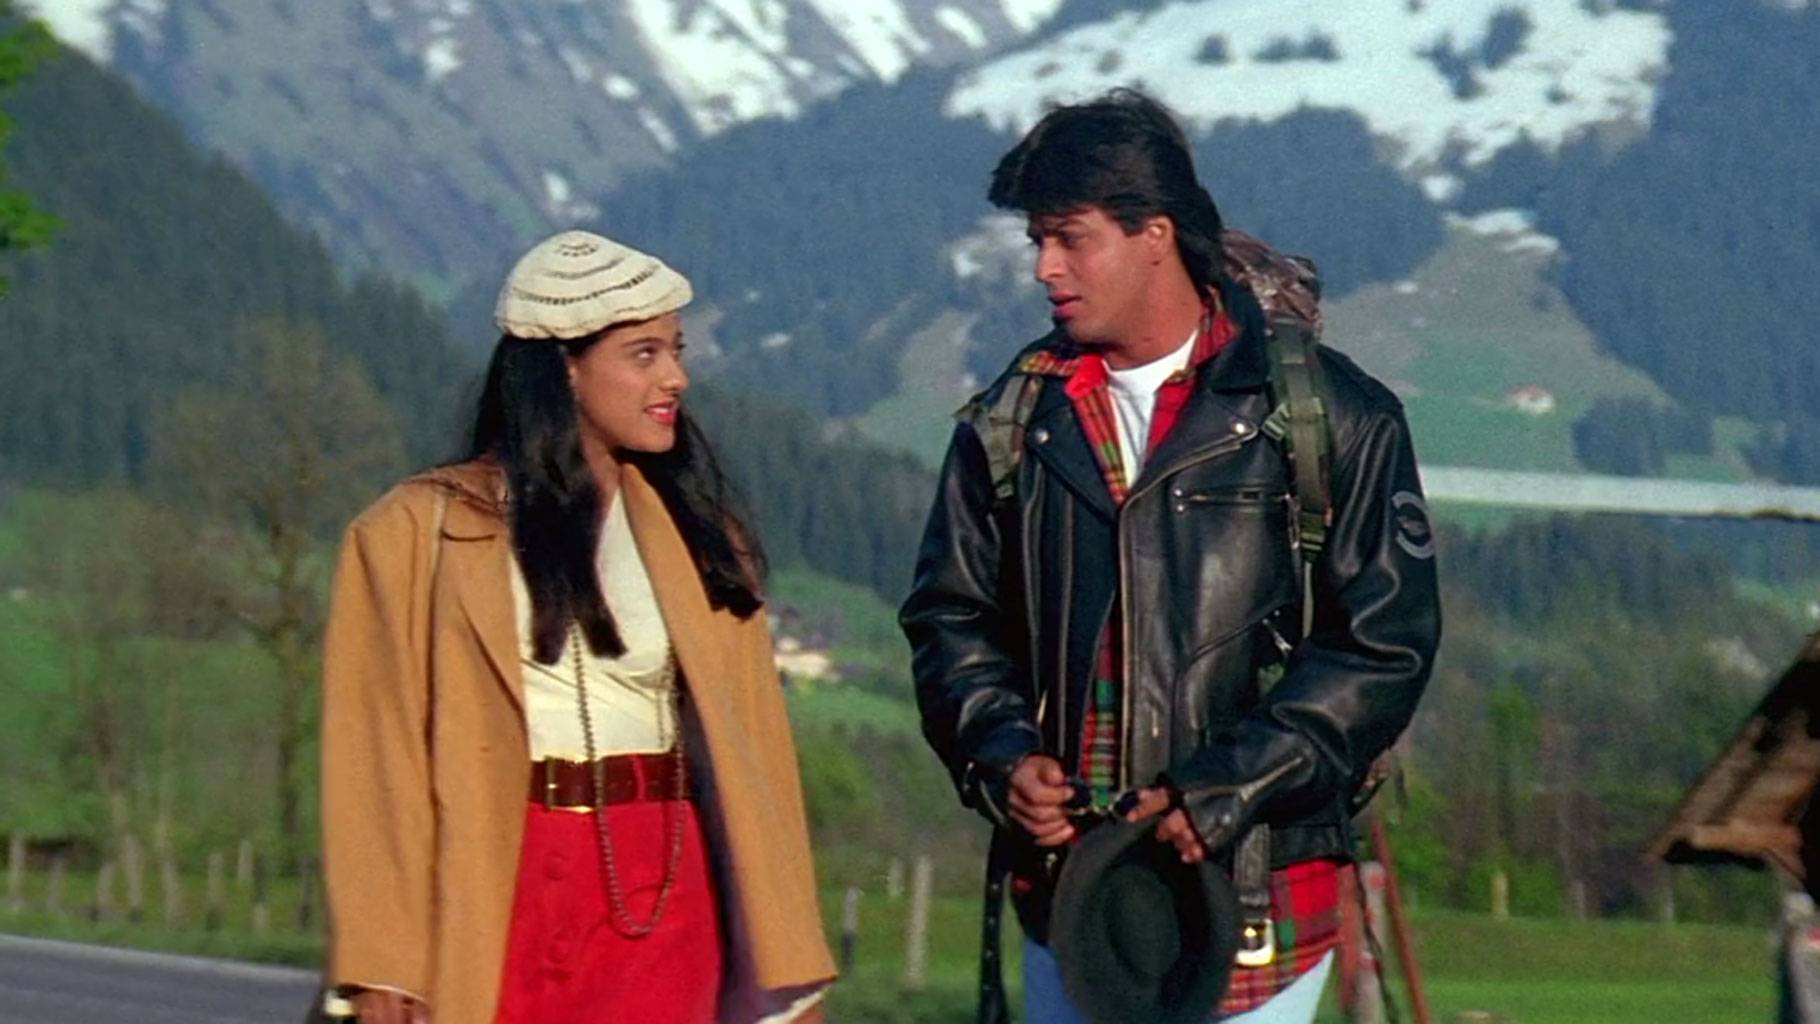 Shah Rukh Khan's DDLJ Celebrates 1,000 Weeks With Clean-Up, Special Show